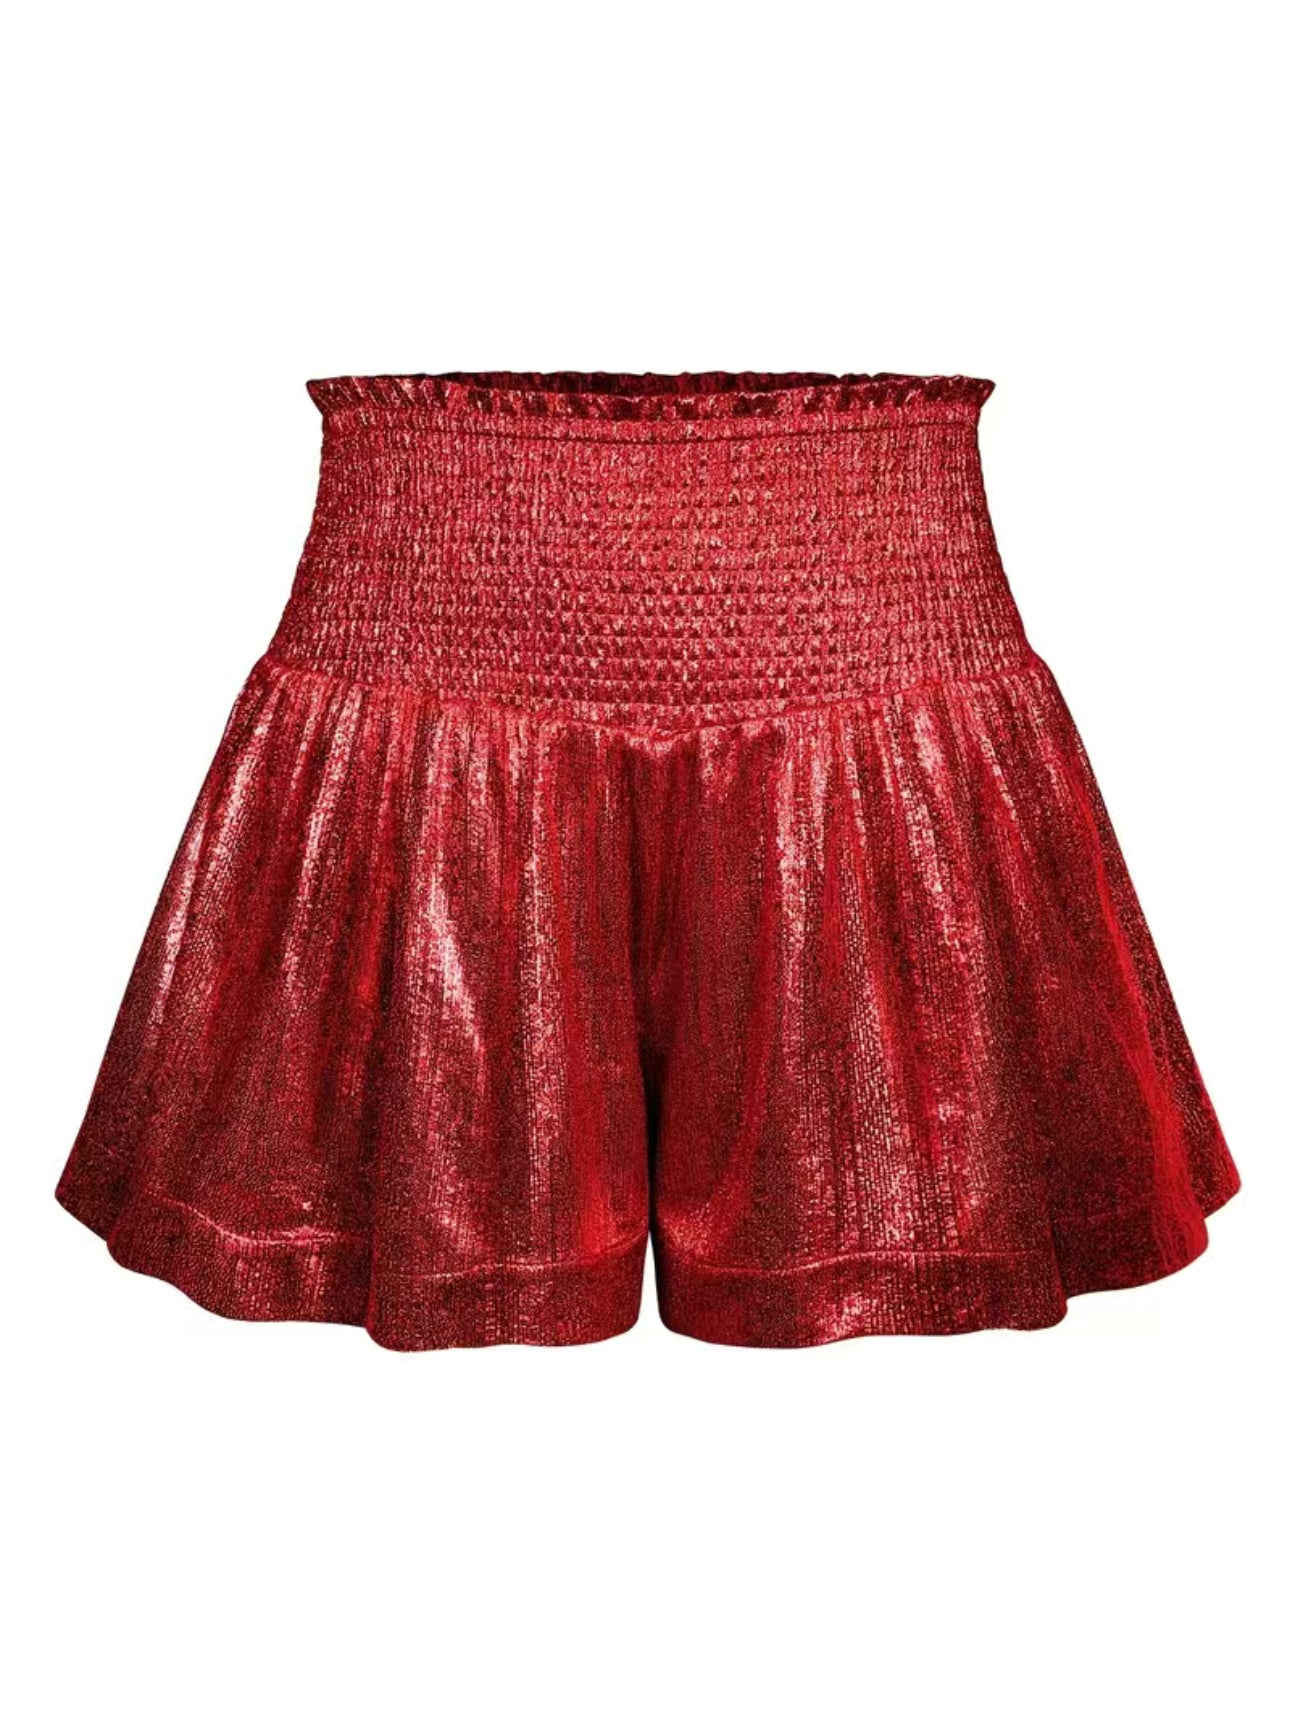 Mrs. Claus shorts